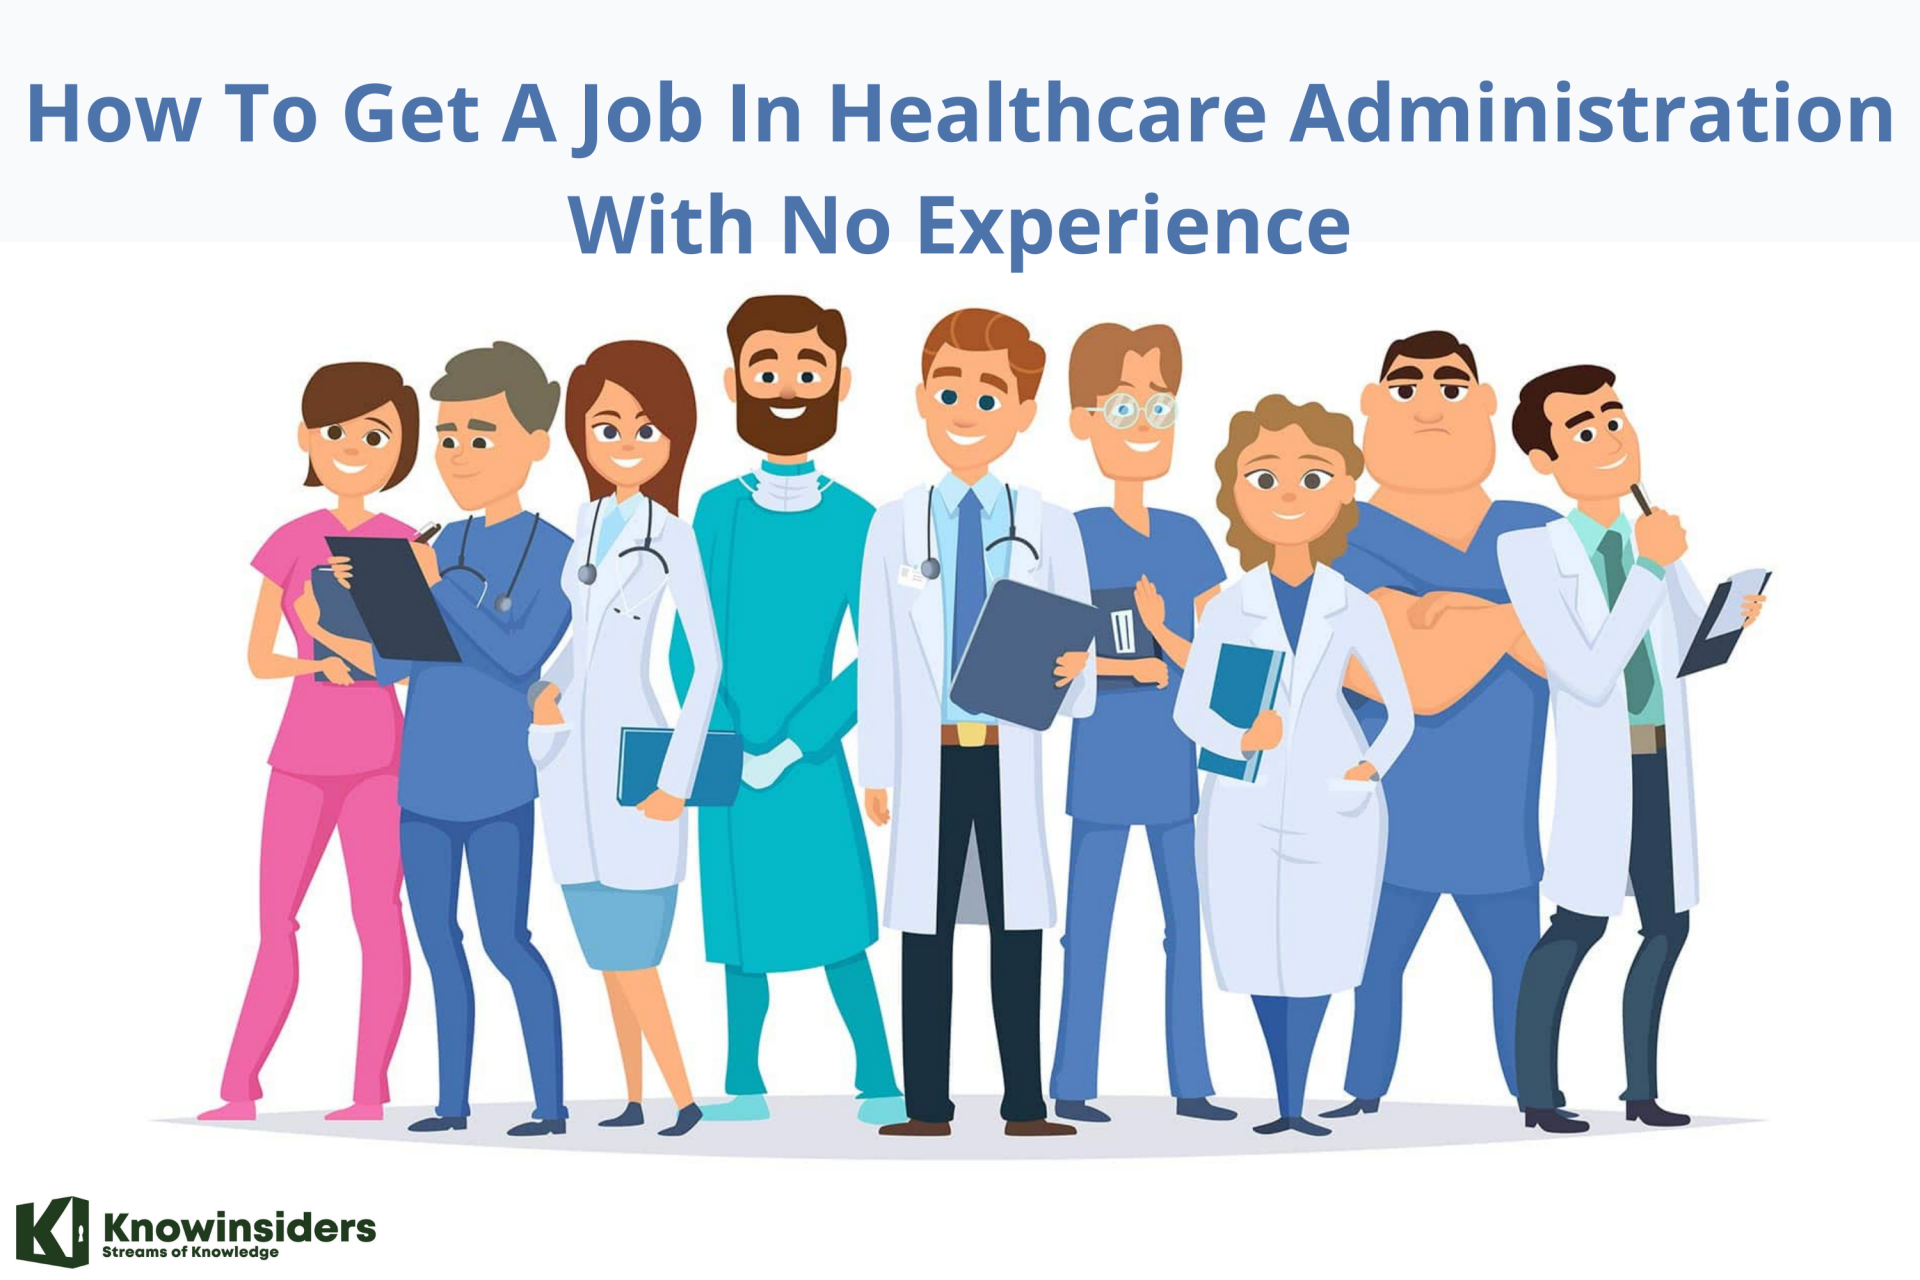 Simple Tips To Get A Job In Healthcare Administration With No Experience